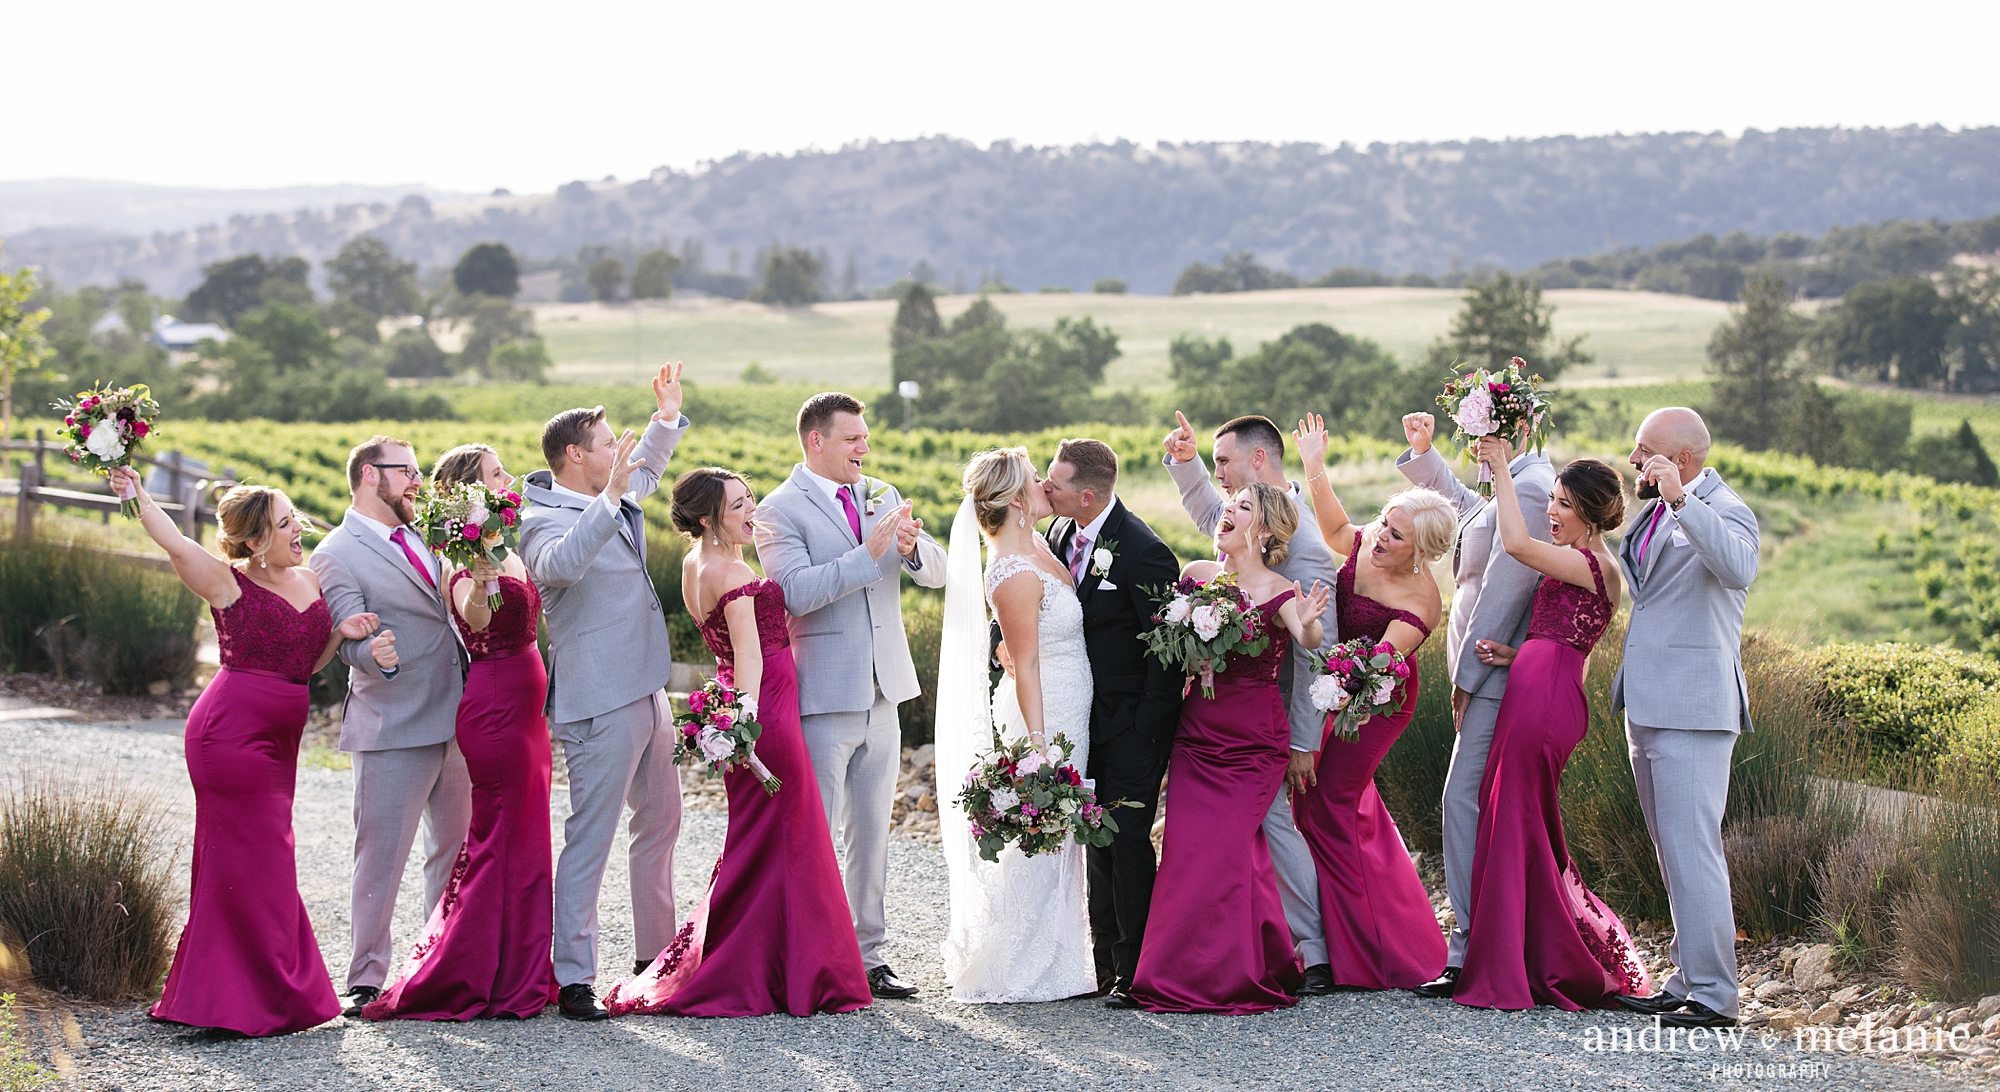 bridal party wedding photo at Helwig Winery in Jackson, CA. magenta dresses and grey suits